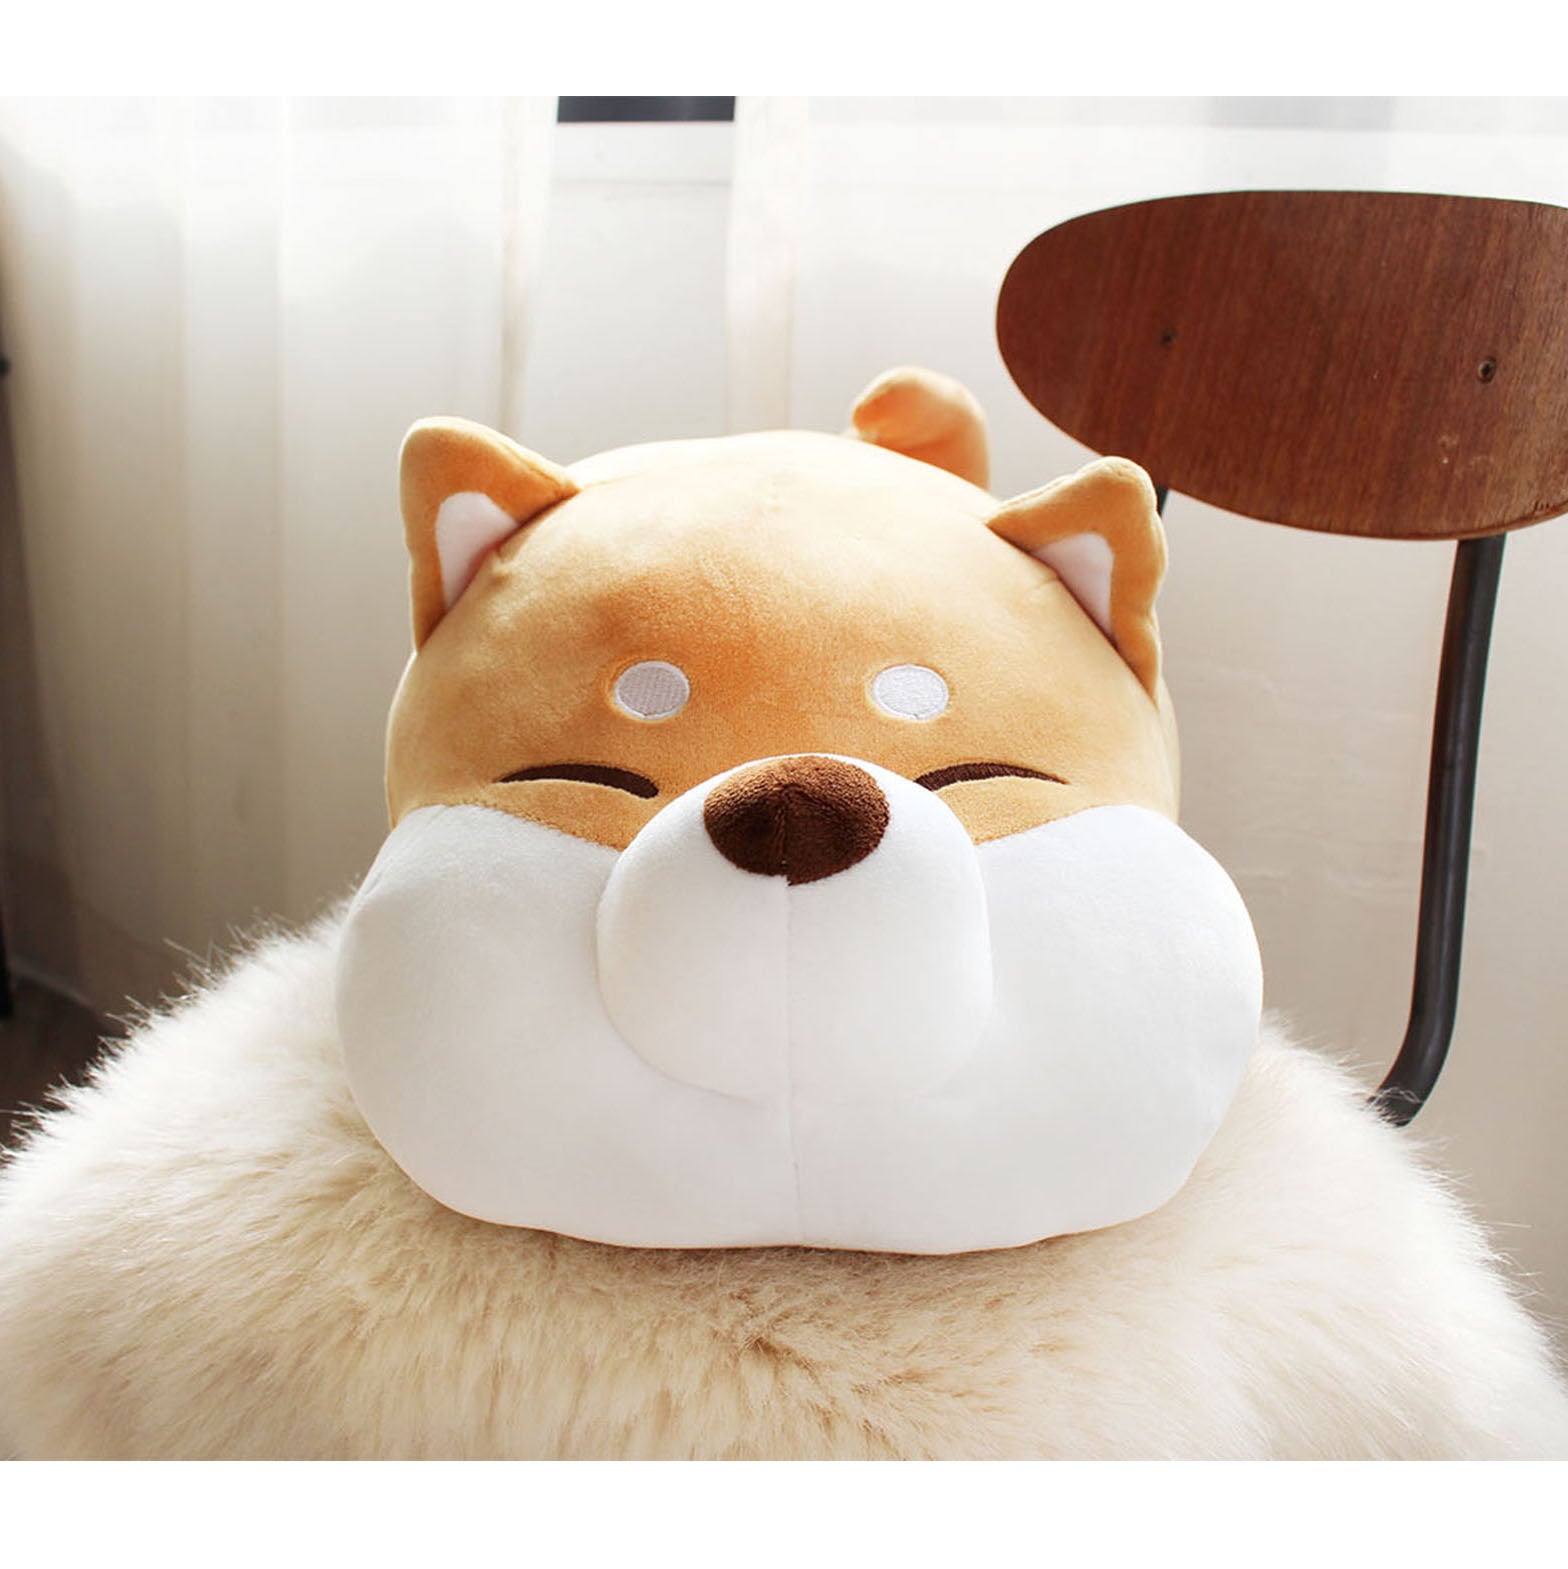 Front view of Shiba Cushion resting on a wooden chair with white fur blanket.